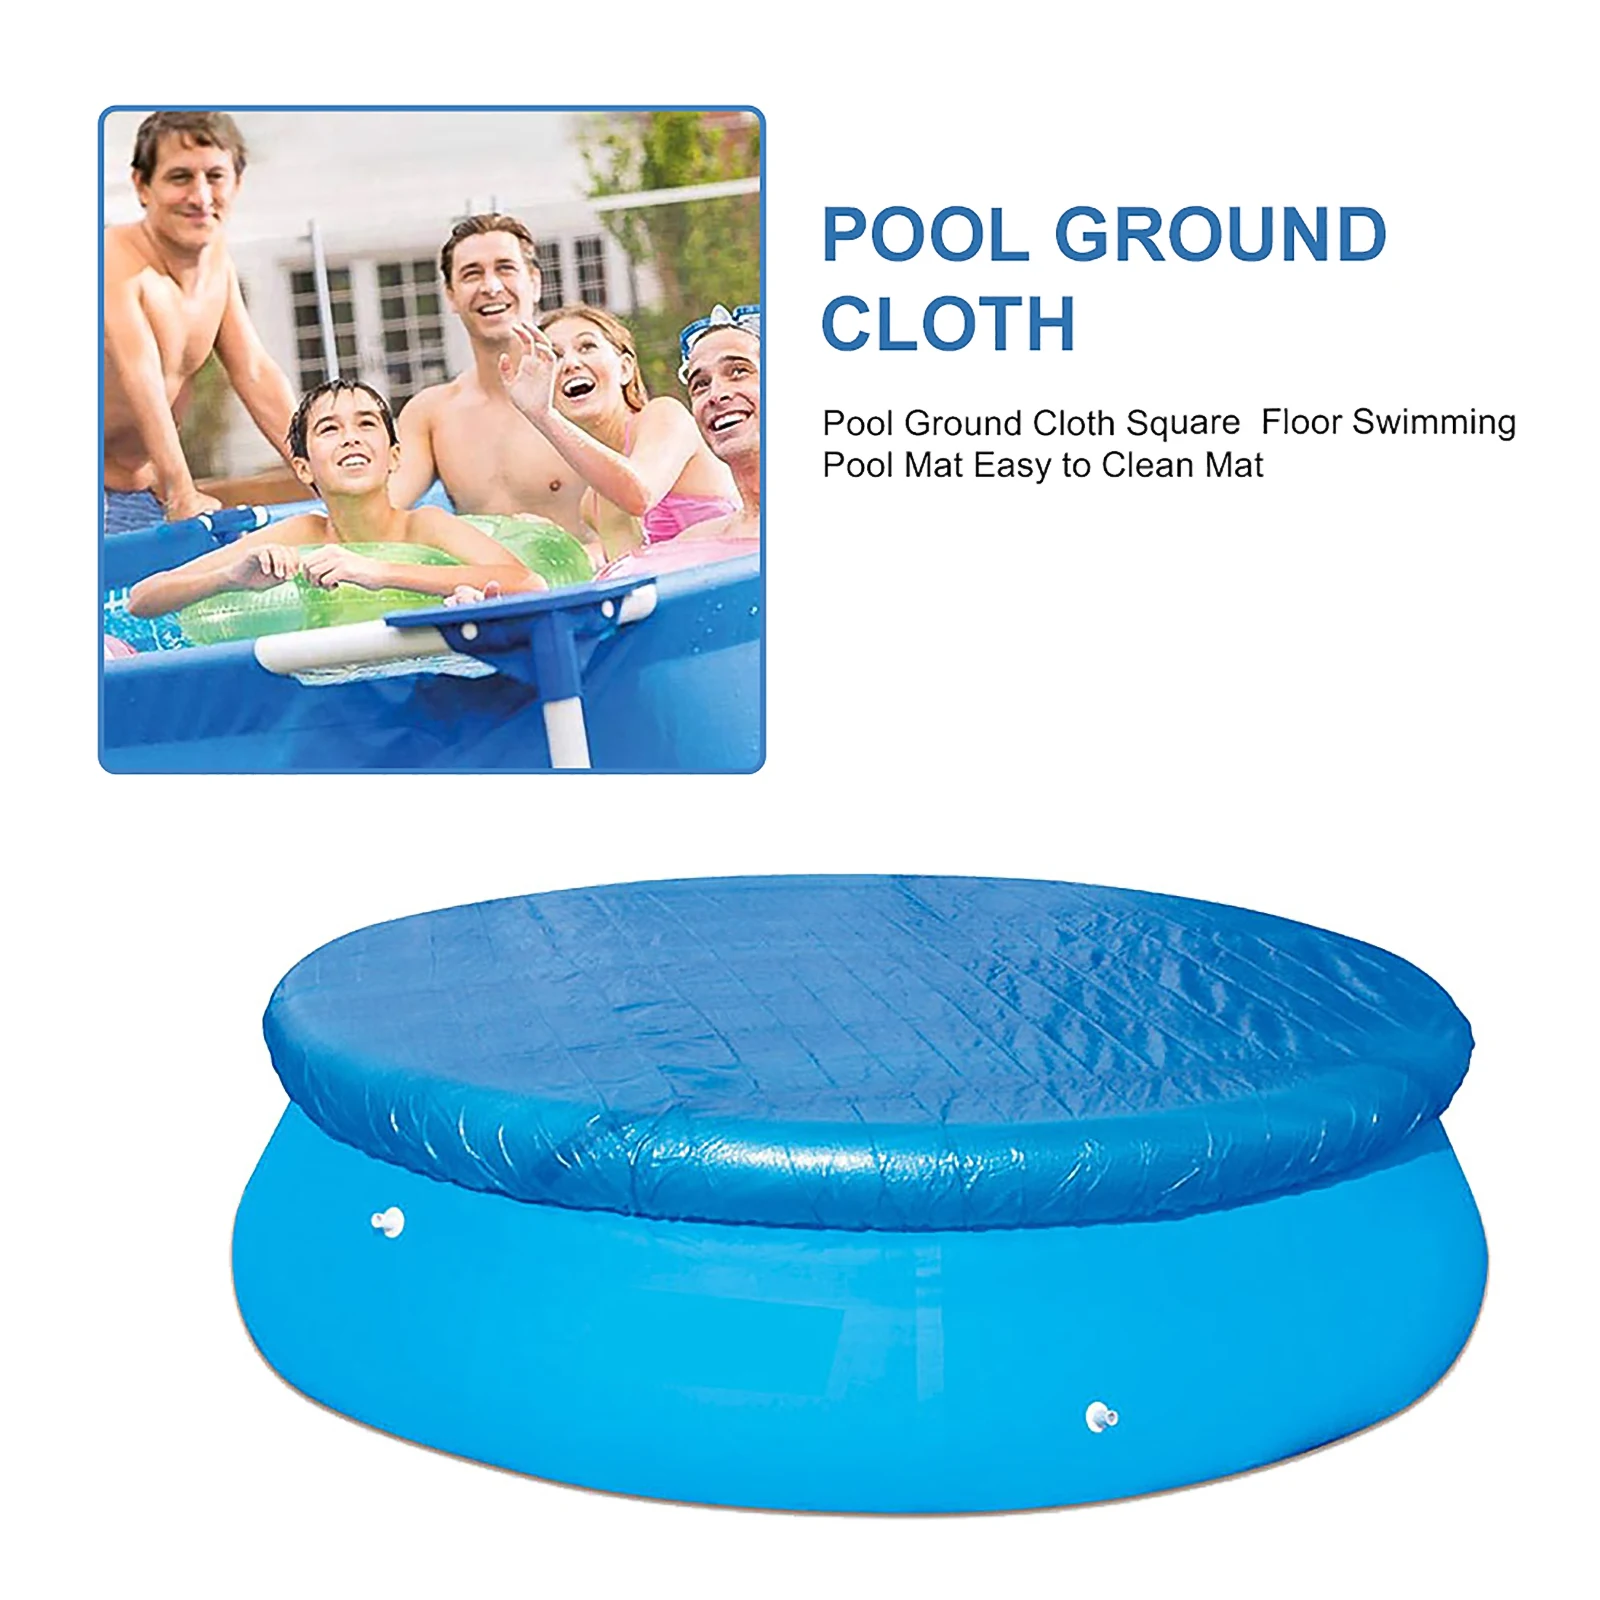 Large Size Swimming Pool Round Ground Cloth Lip Cover Dustproof Floor Cloth Mat Cover For Outdoor Villa Garden Pool Accessories